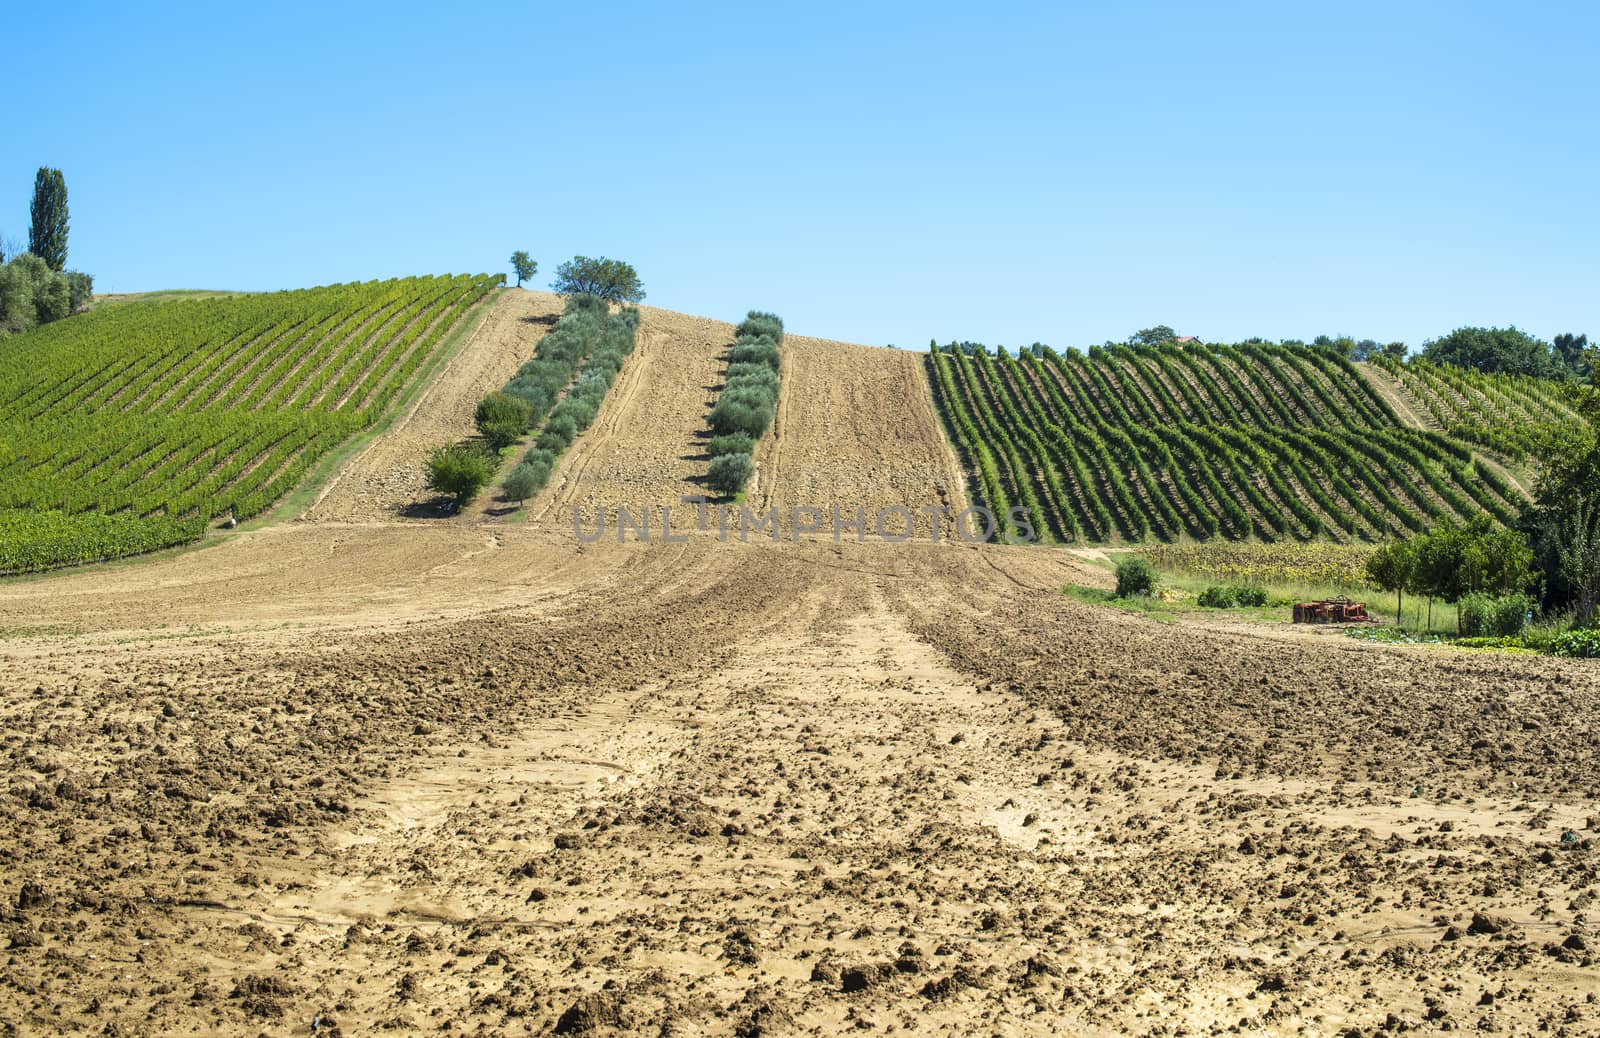 Olive trees in rows and vineyards in Italy. Olive and wine farm. Tilled ground soil. Agriculture field with olive trees. 